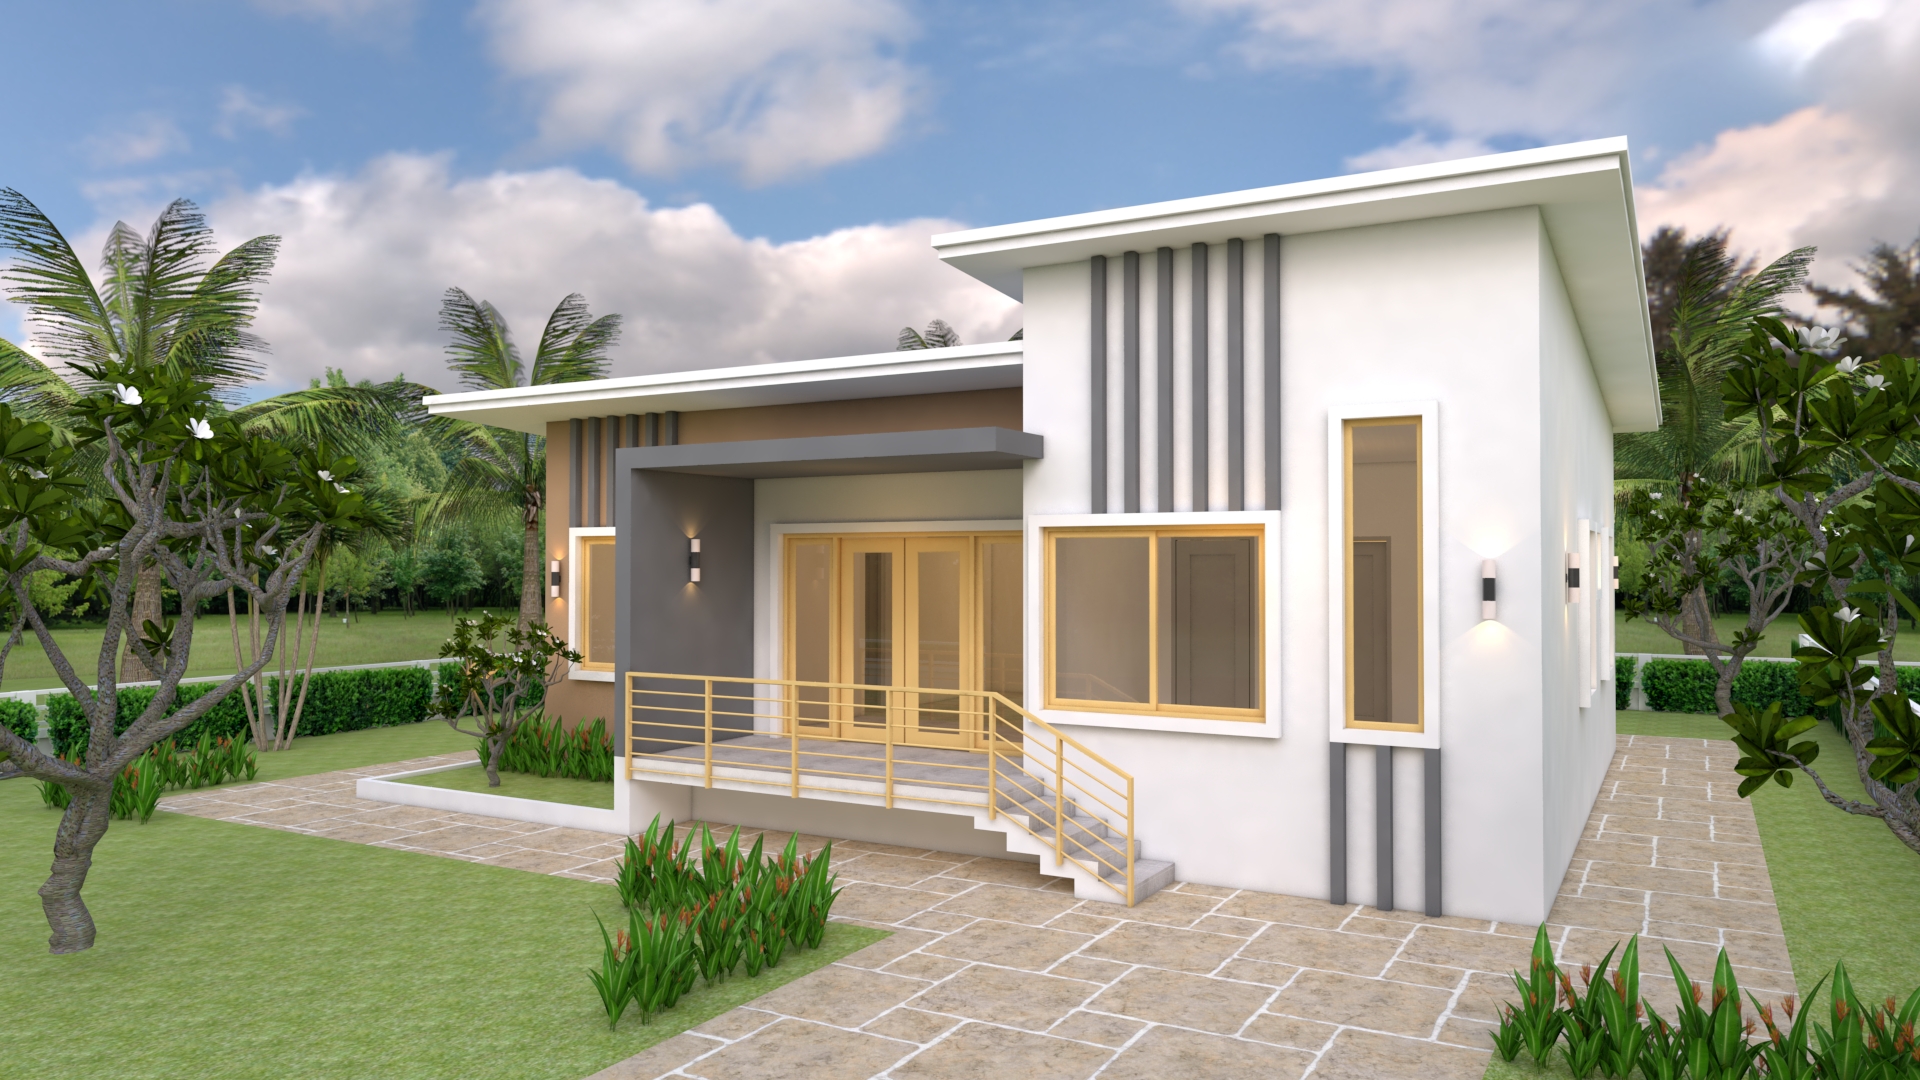 House Design 3d 12x12 Meter 39x39 Feet 4 Bedrooms Shed Roof